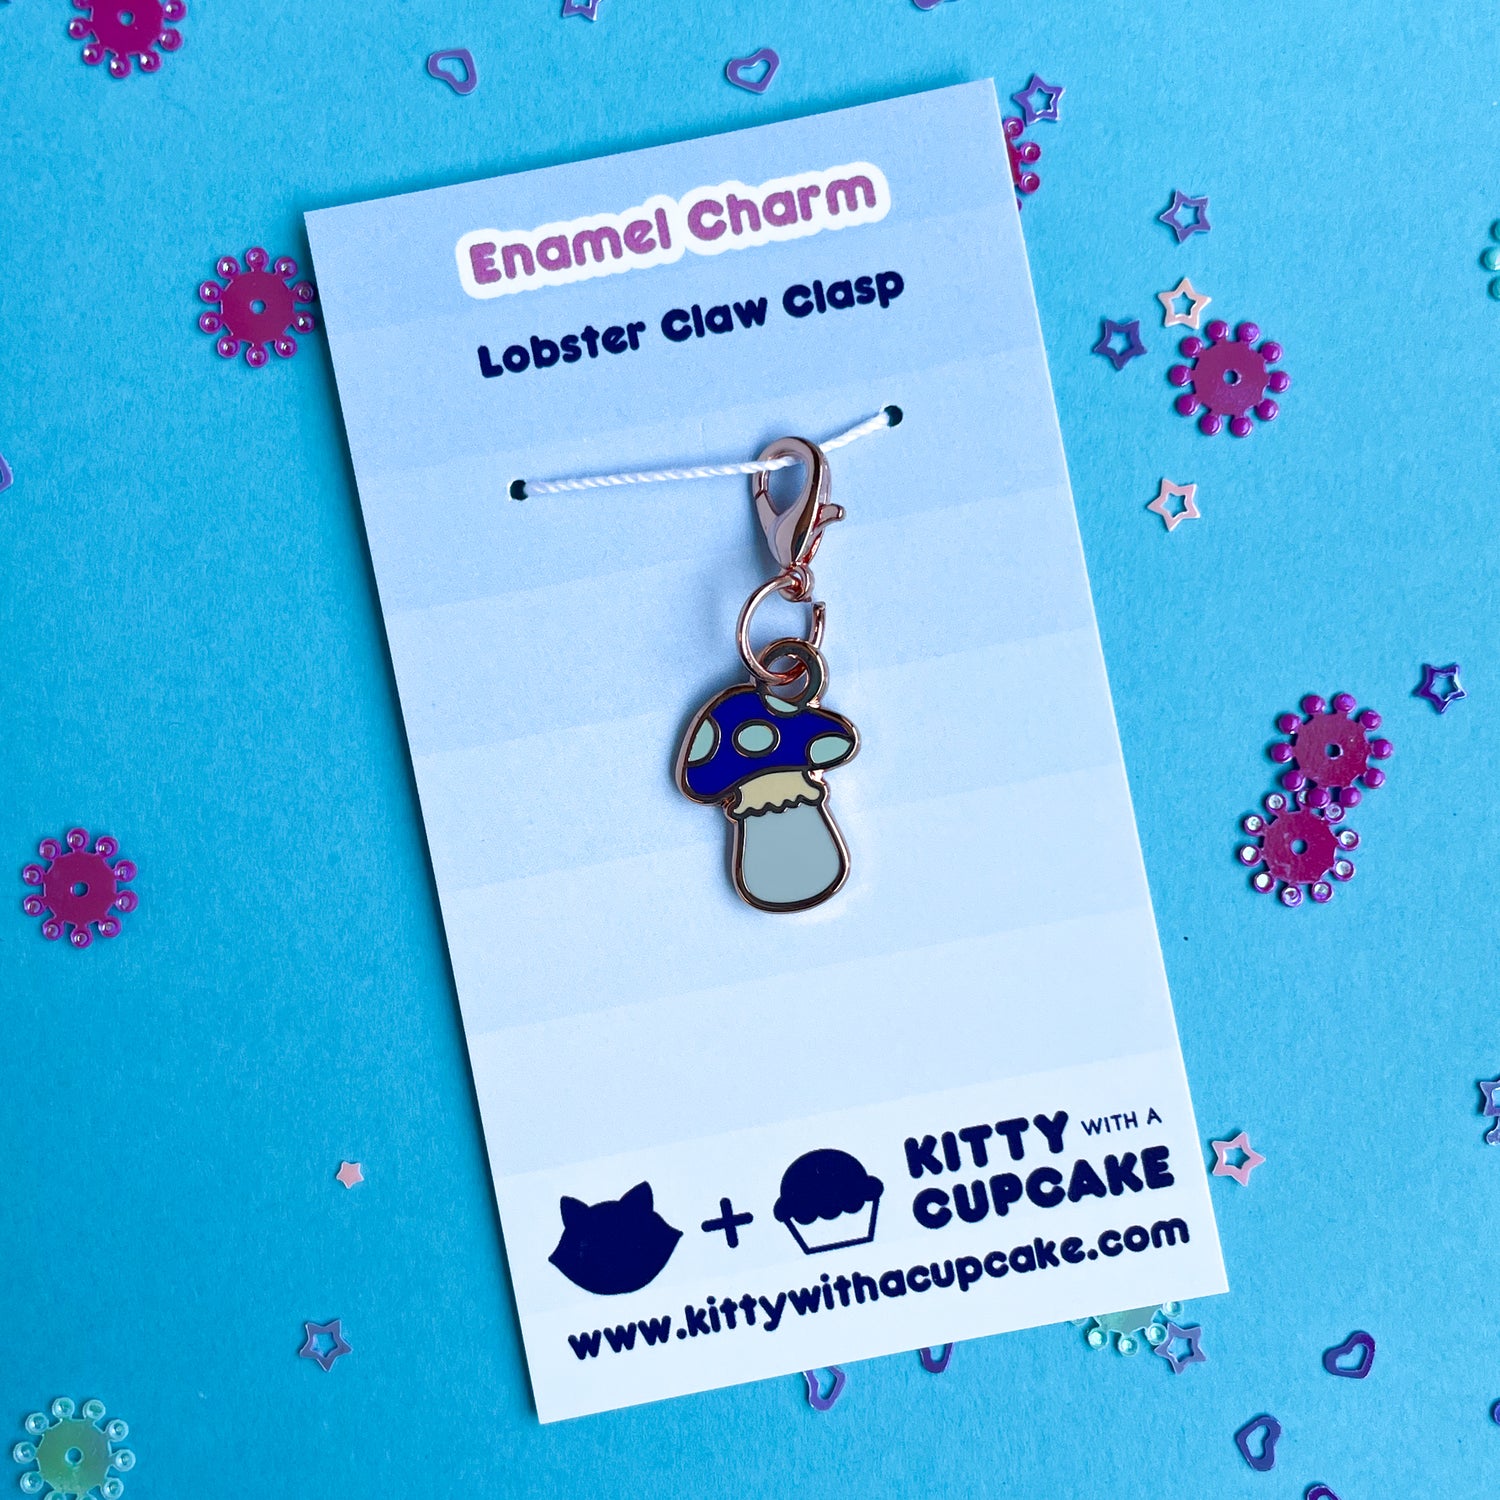 A mushroom shaped charm packaged on a blue card that reads "Enamel Charm" on a blue background covered with purple confetti. 